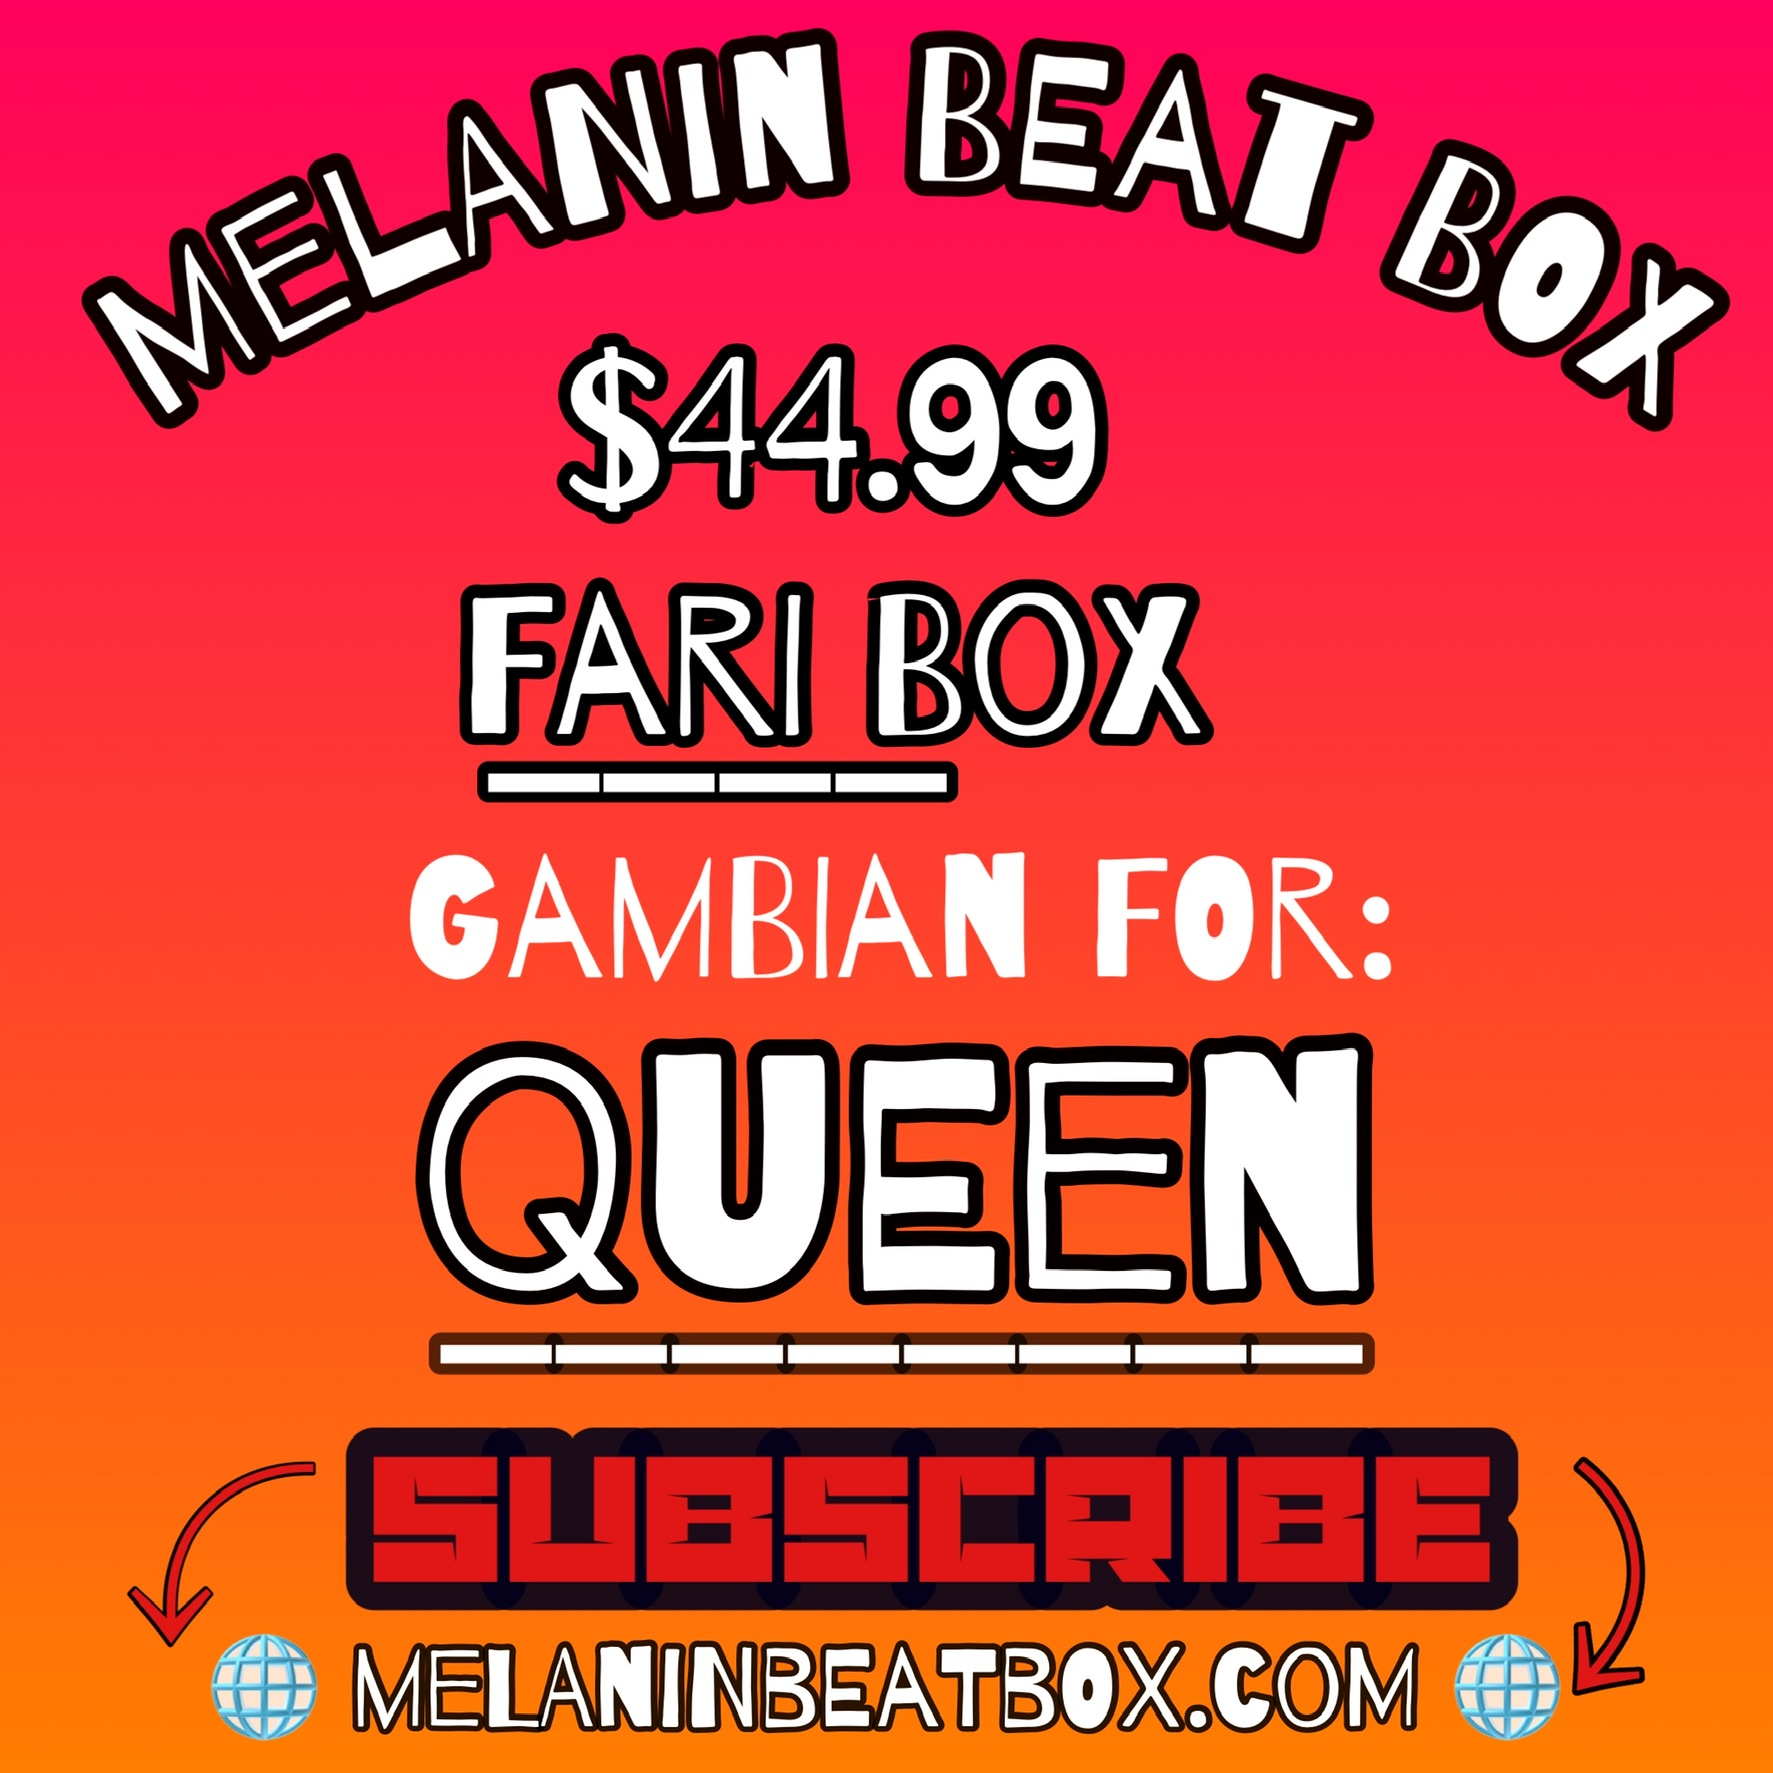 Melanin Beat Box is a monthly subscription service sourced by indie black creatives and black owned businesses only.